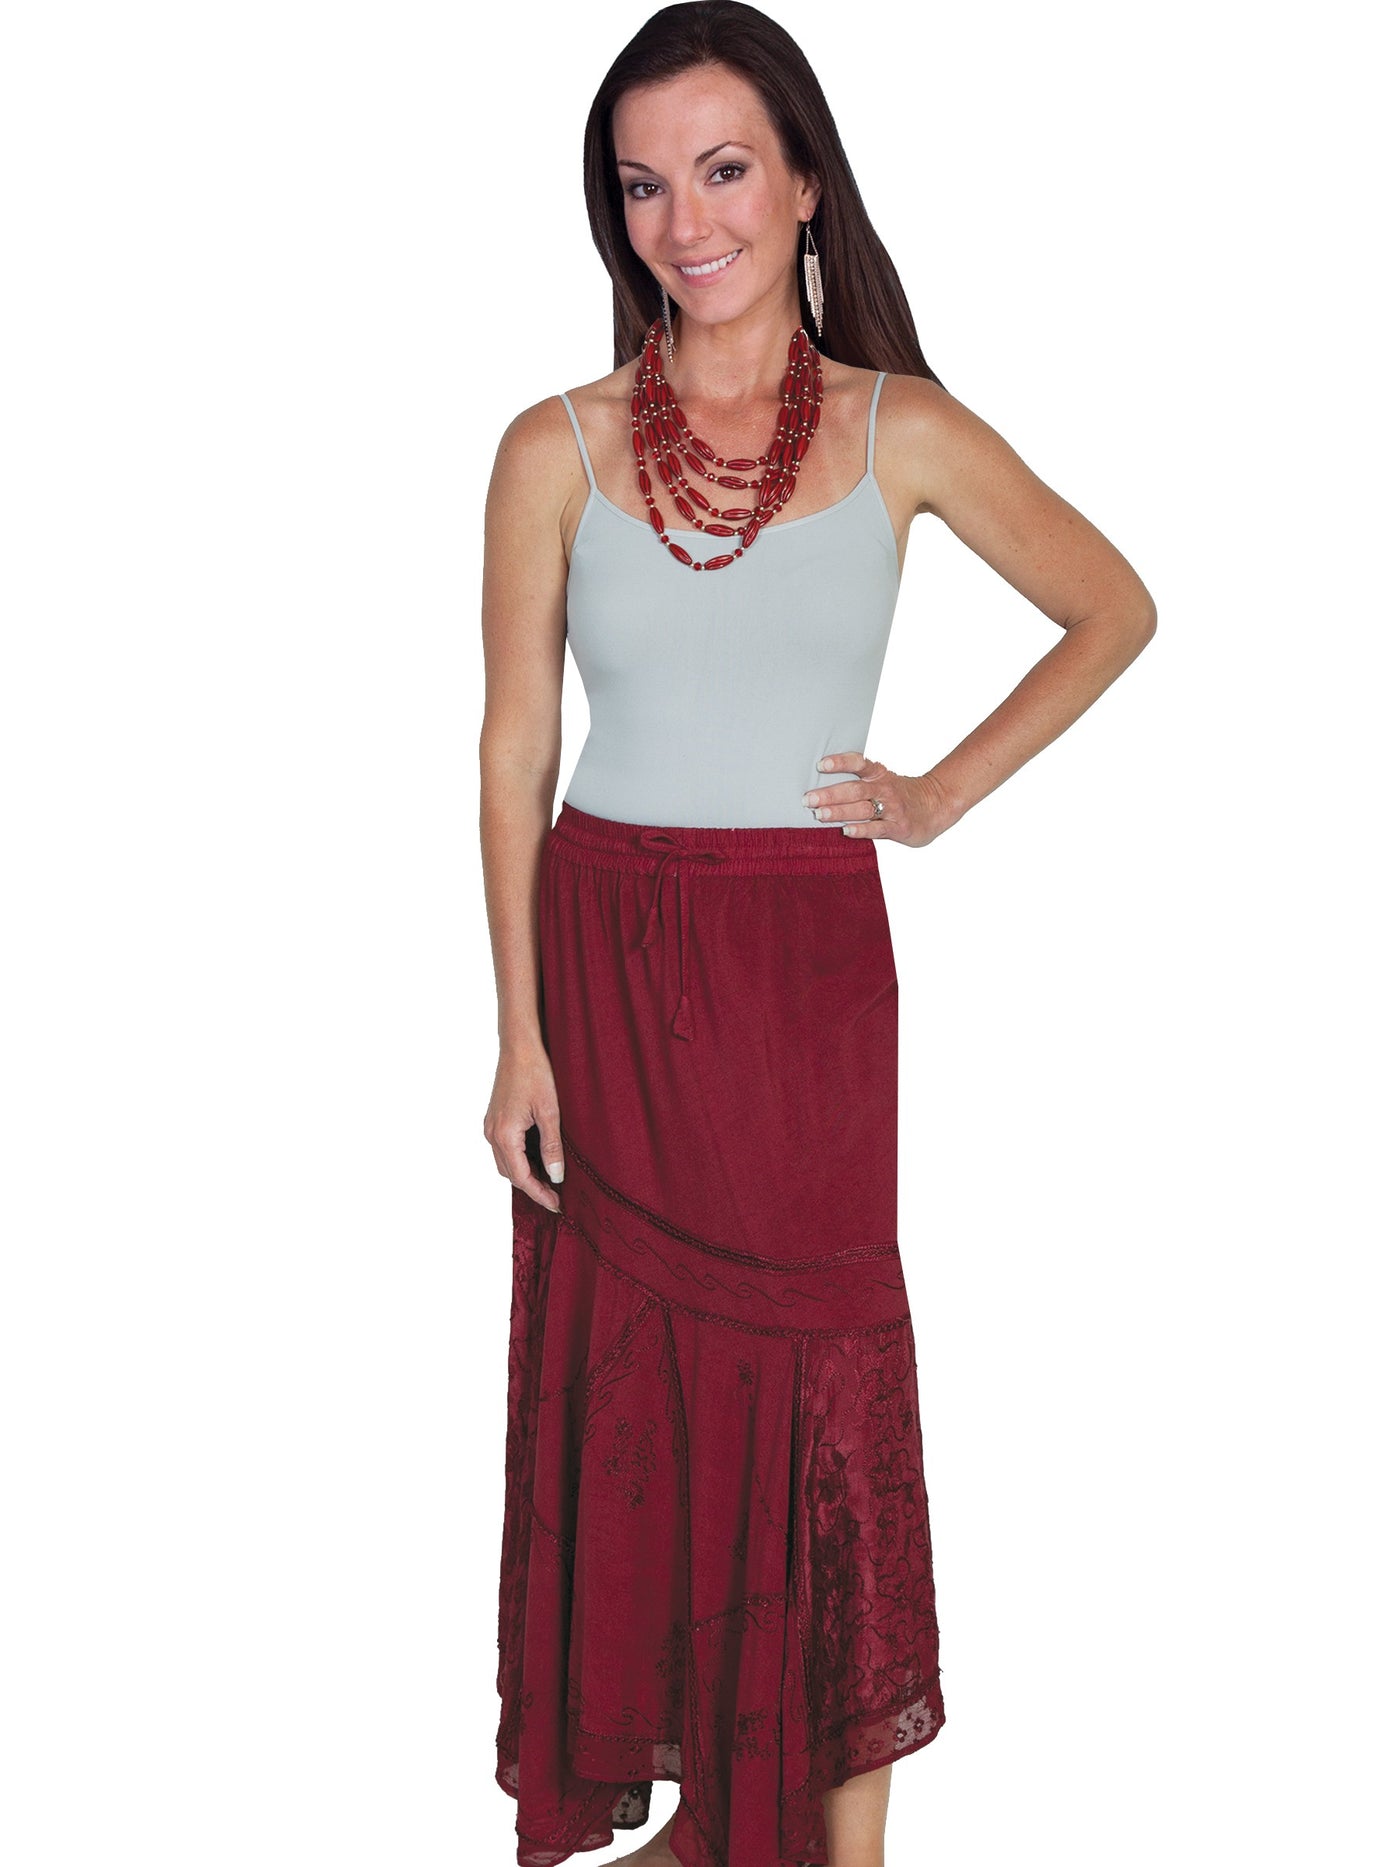 Western Style Multi-Fabric Skirt in Burgundy - SOLD OUT